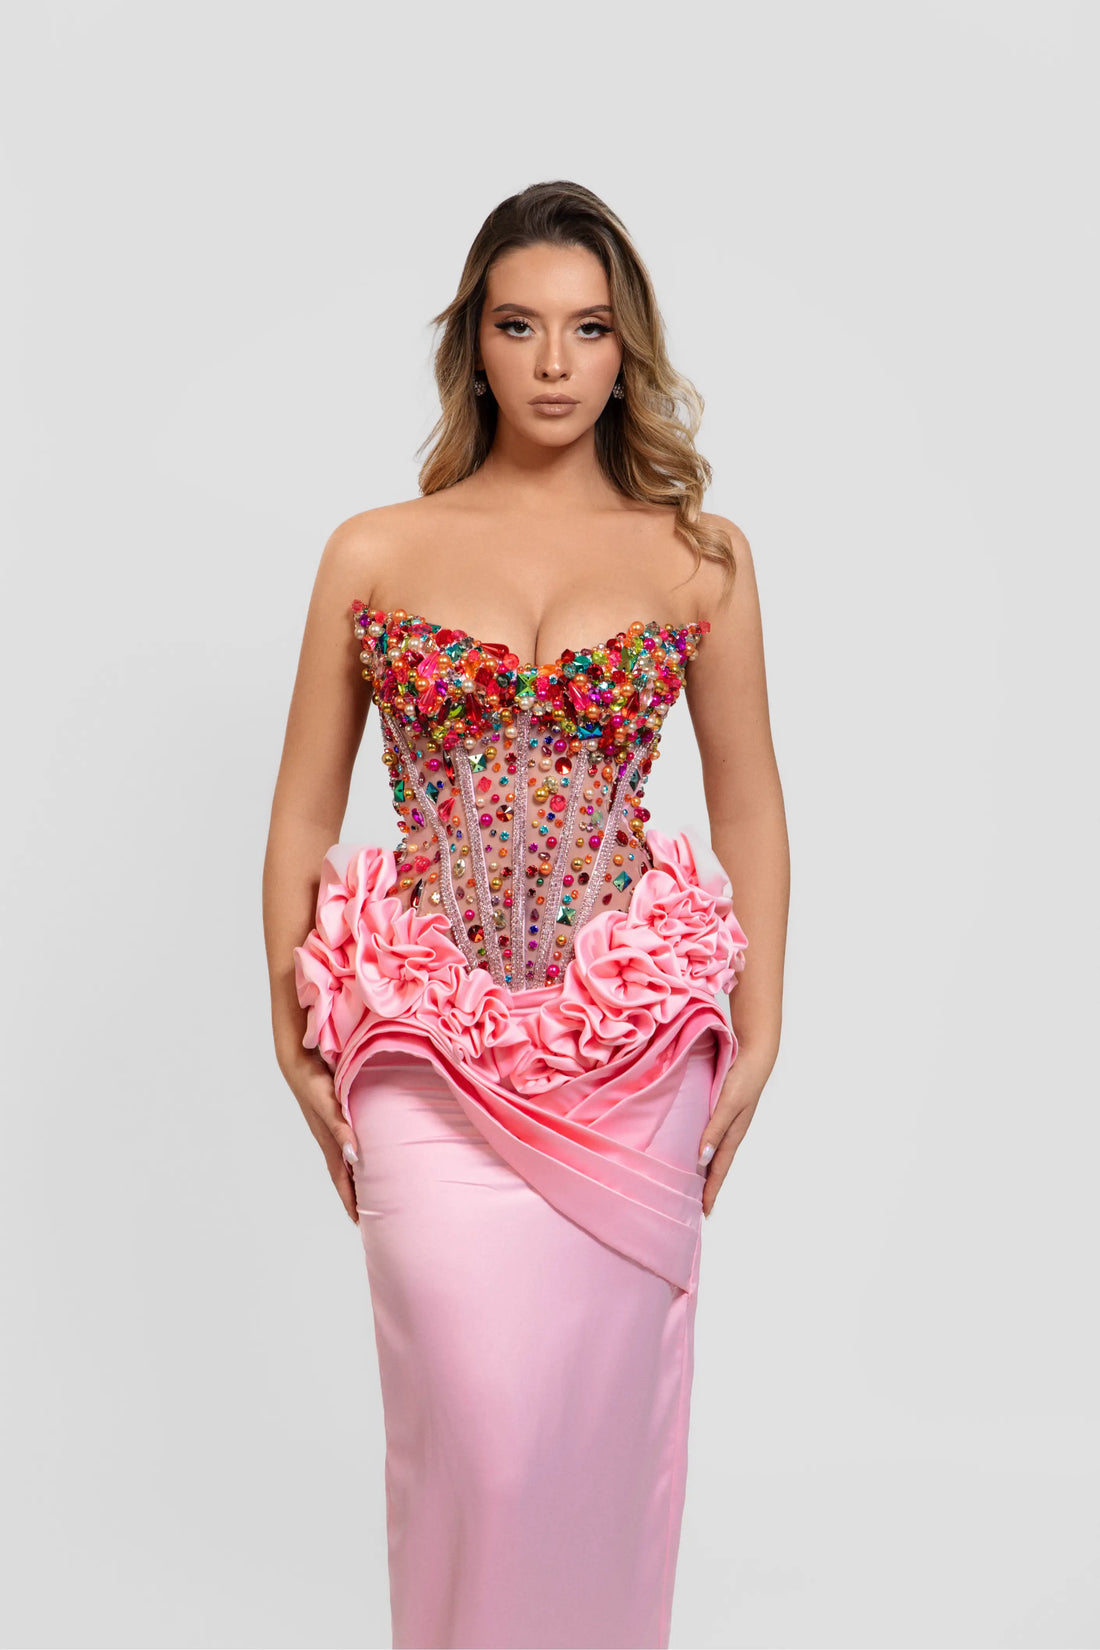 How to Choose the Best Prom Dress Colors for Your Event?